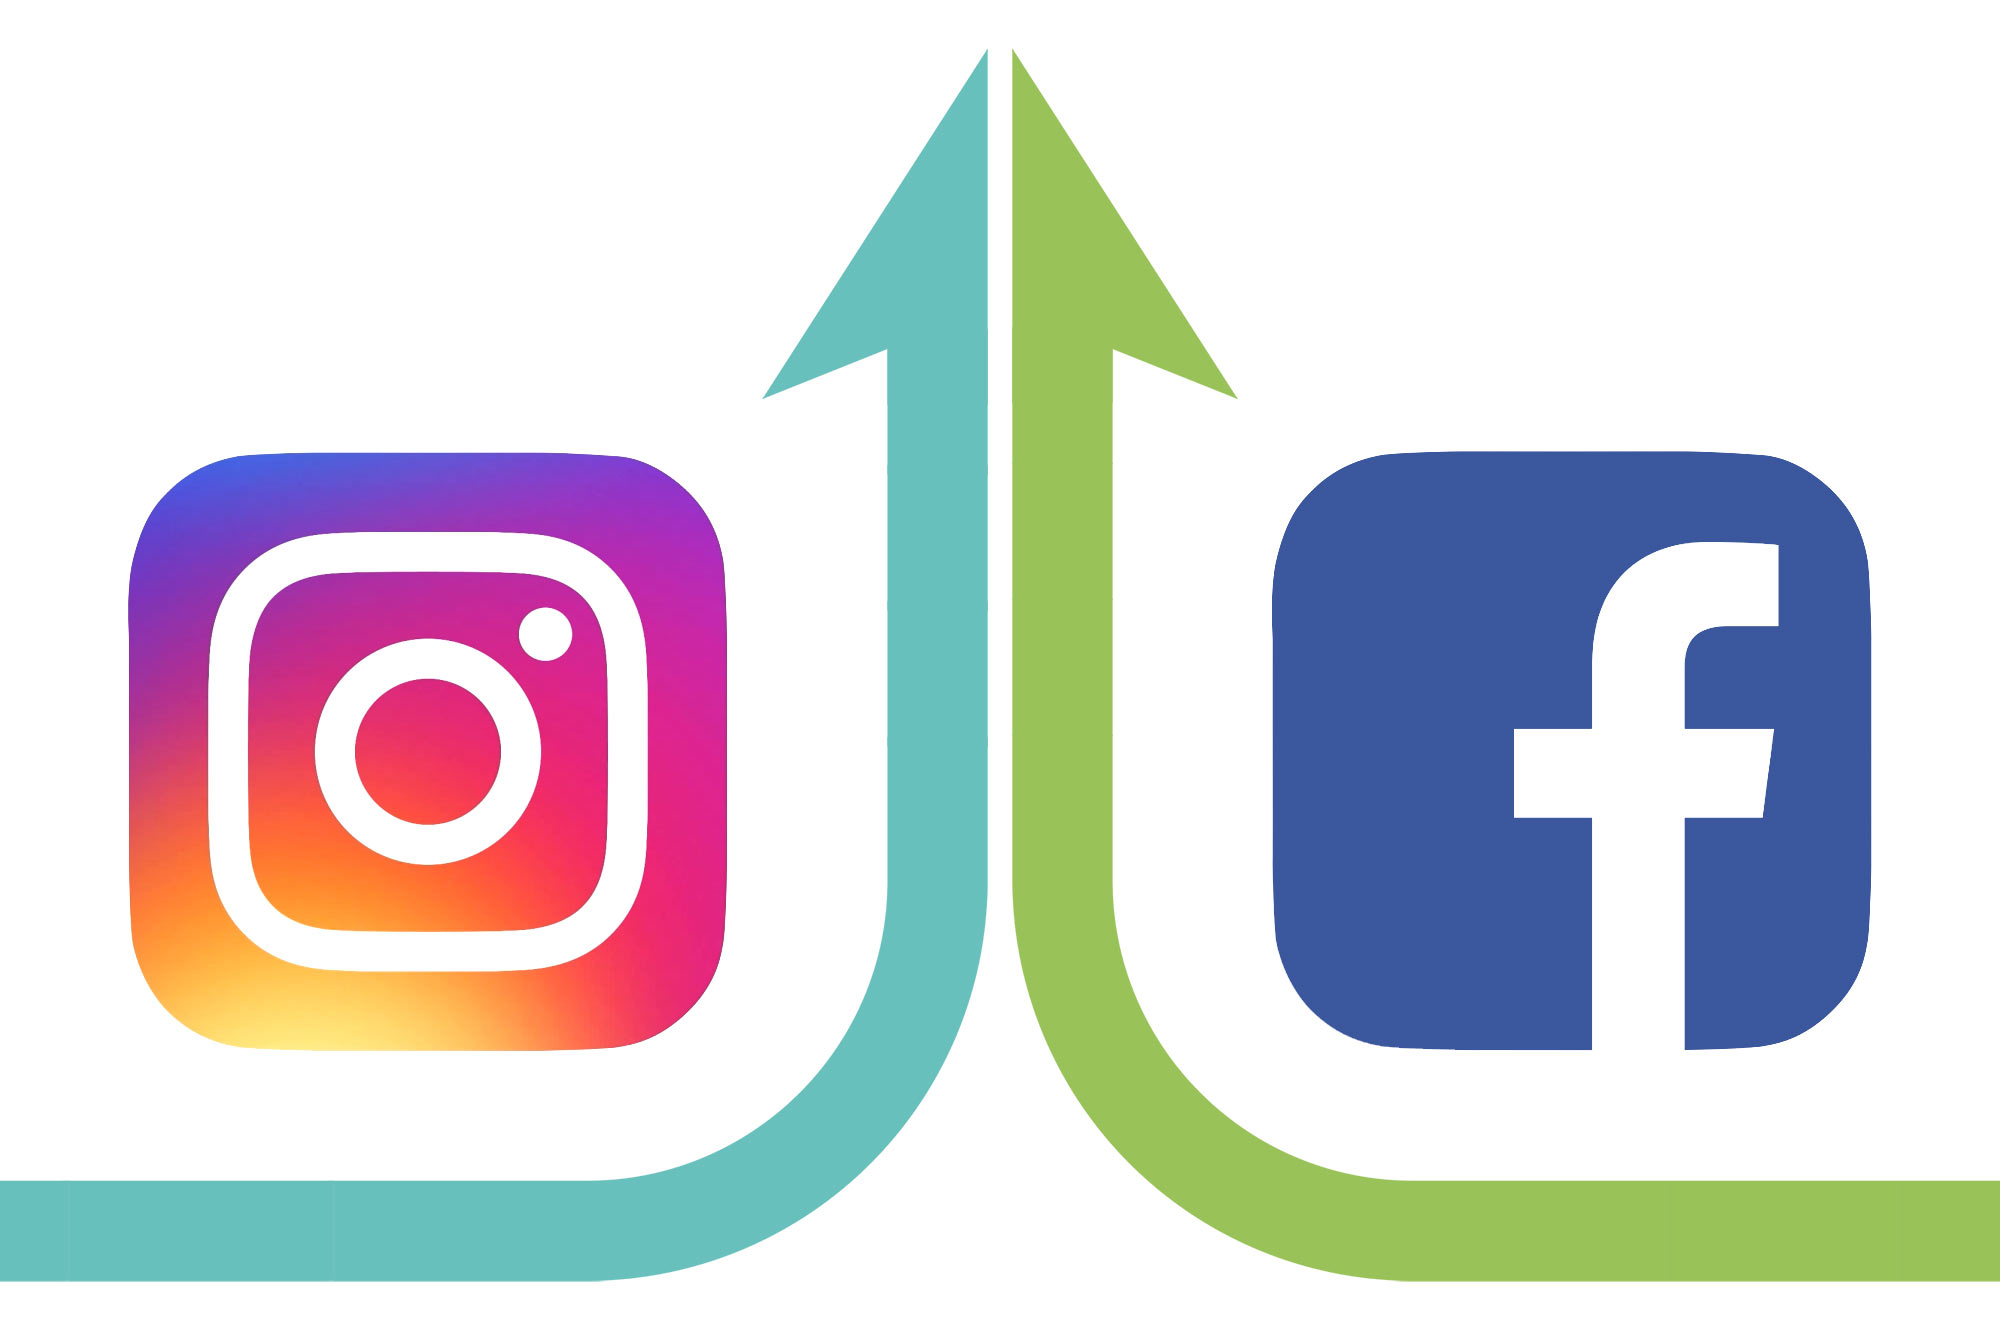 Unlink Your Facebook and Instagram Accounts Using This Method!